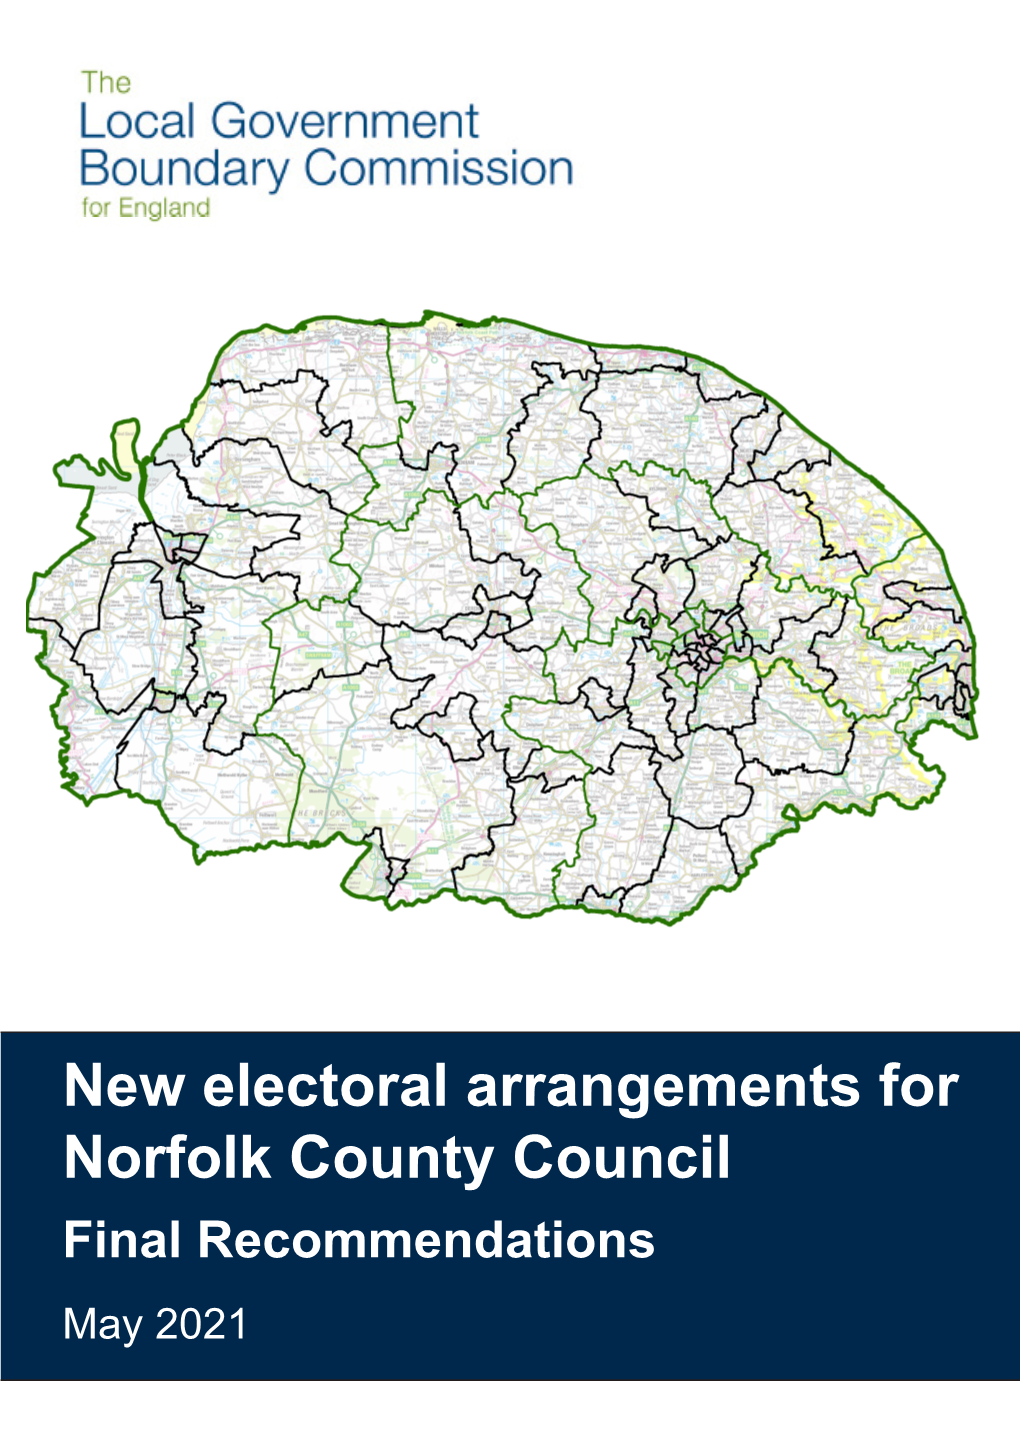 Final Recommendations Report for Norfolk County Council